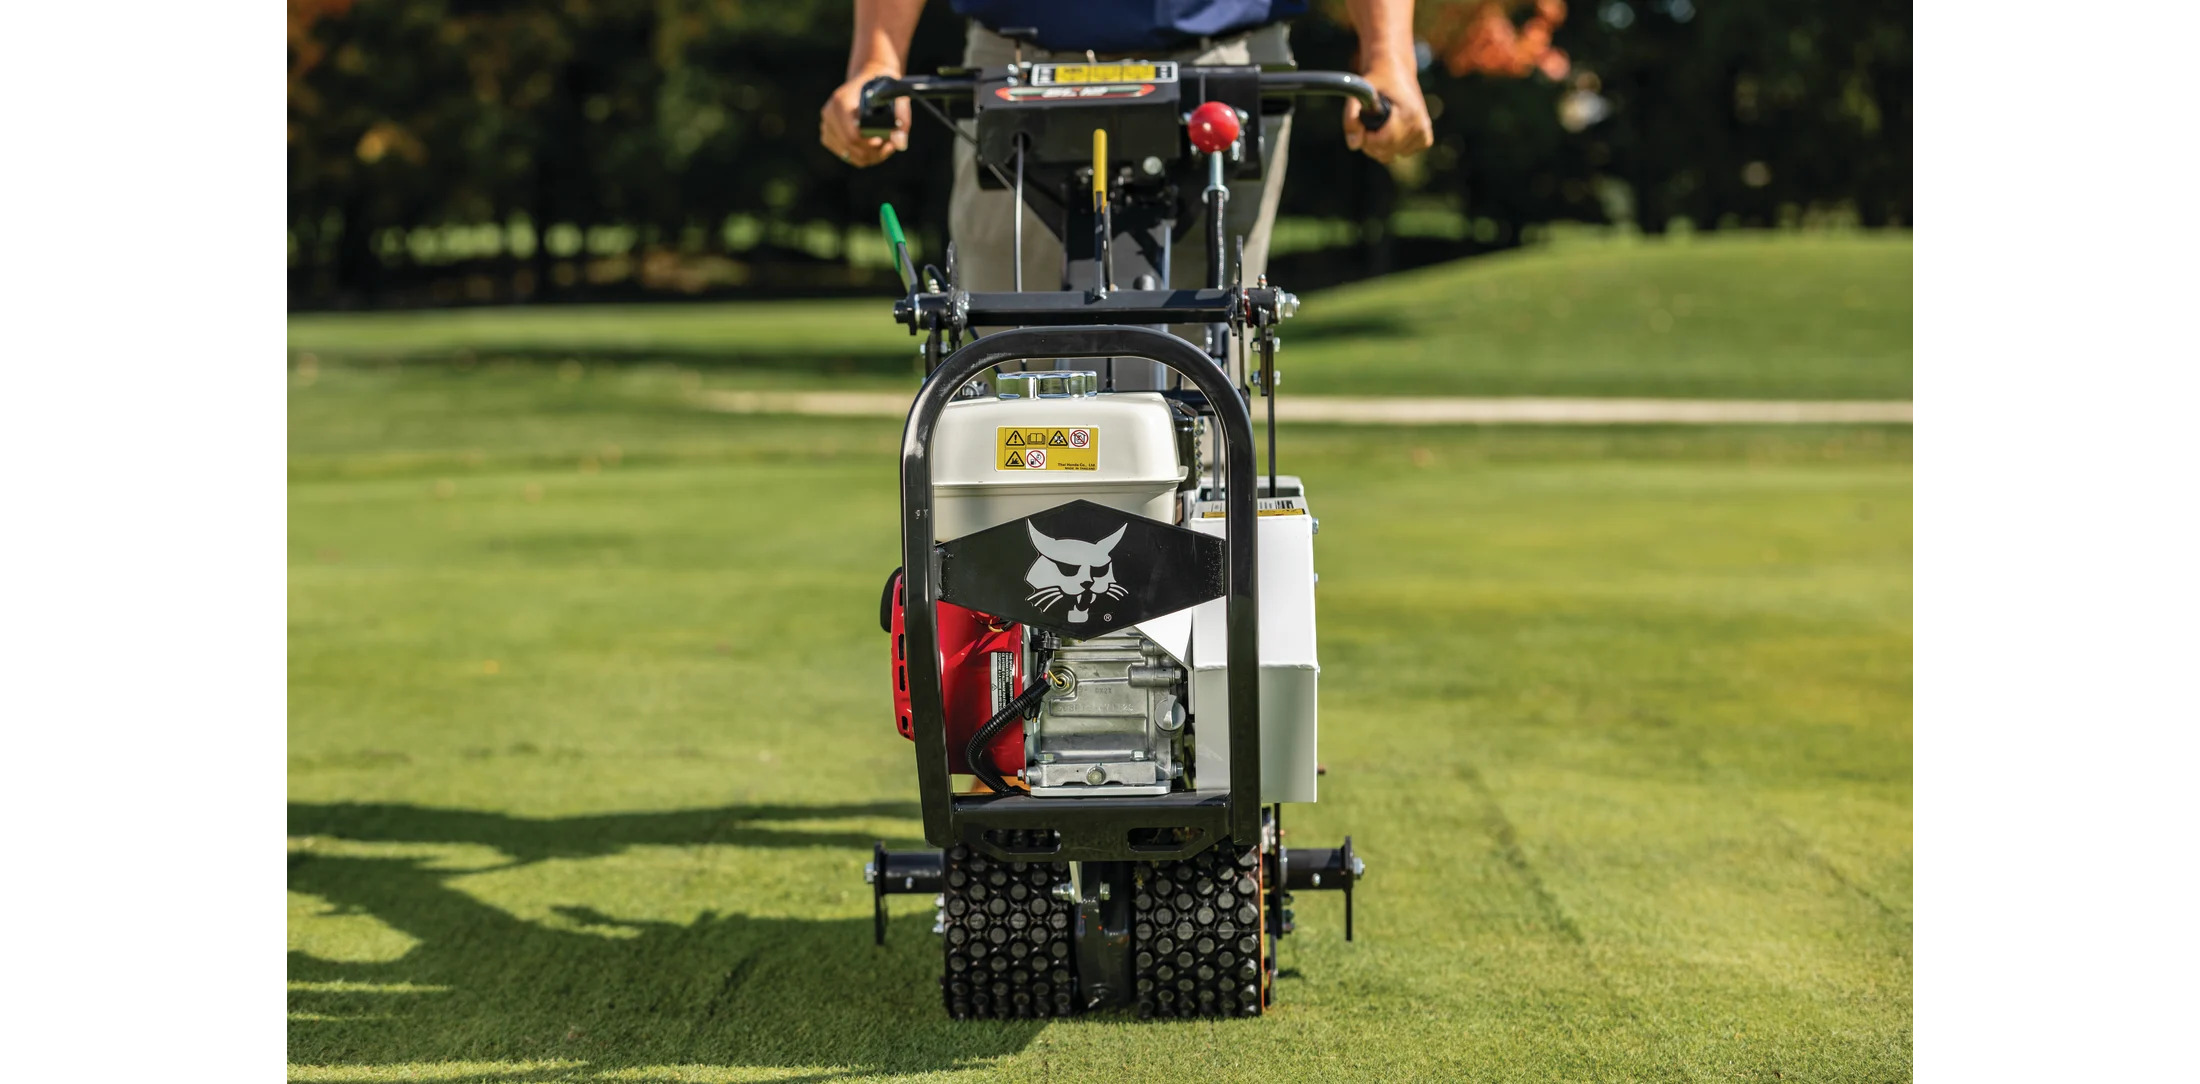 Browse Specs and more for the Bobcat SC12 Sod Cutter – Briggs & Stratton Engine - Bobcat of Huntsville